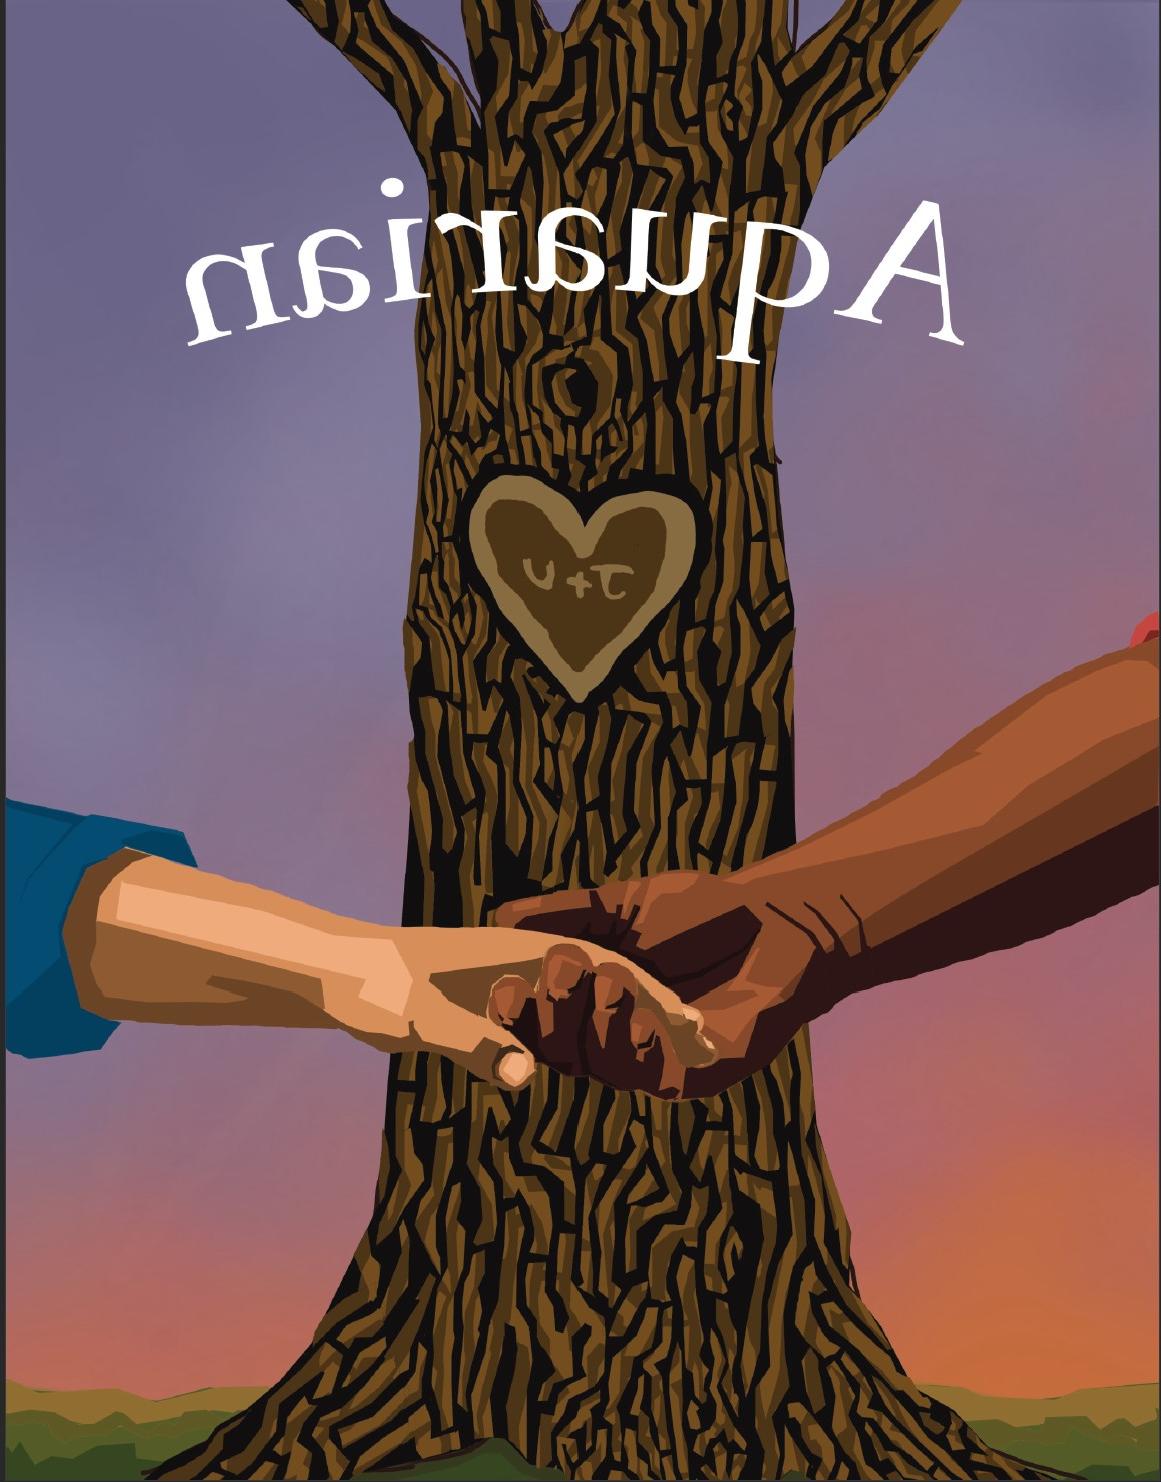 The cover. In white text over a digitally drawn image, the word 宝瓶座时代的 is rounded. Behind that, there is a brown tree with the letters J + U in a heart are carved. In front of the tree and below the title, are to hands clapsed together. Behind the tree is a colorful sunset with green grass.